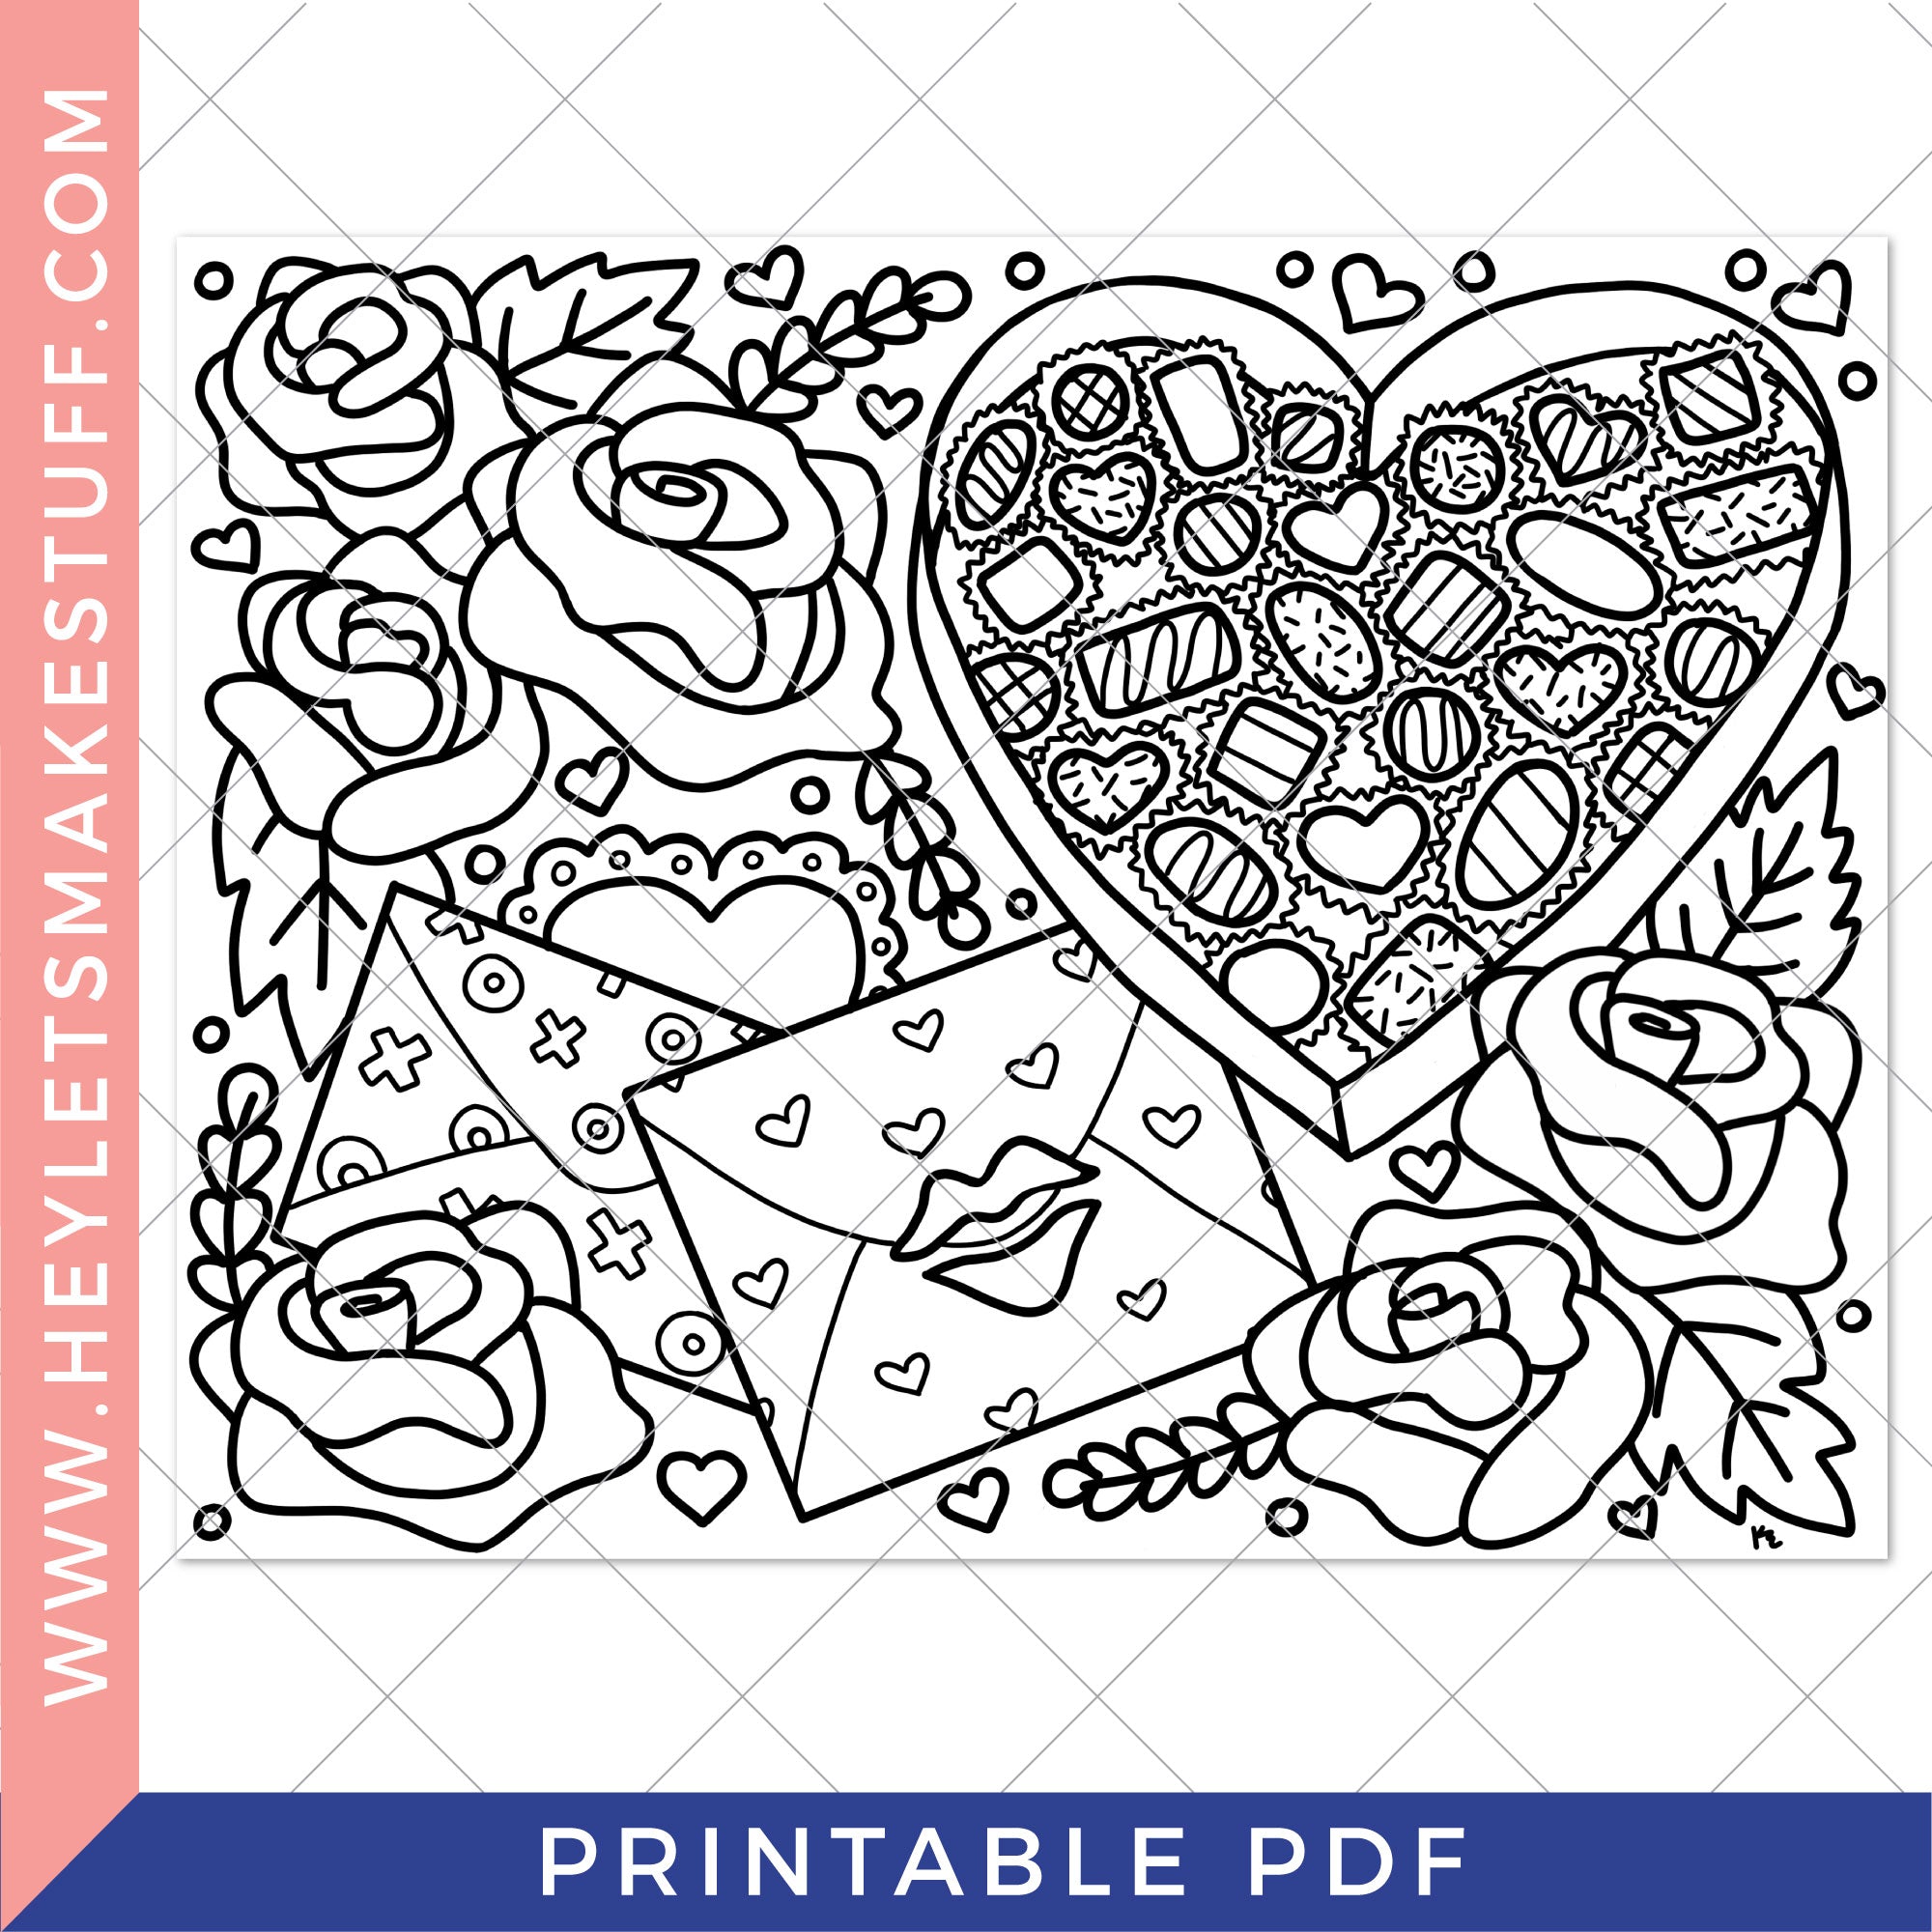 Printable valentines day coloring page â hey lets make stuff